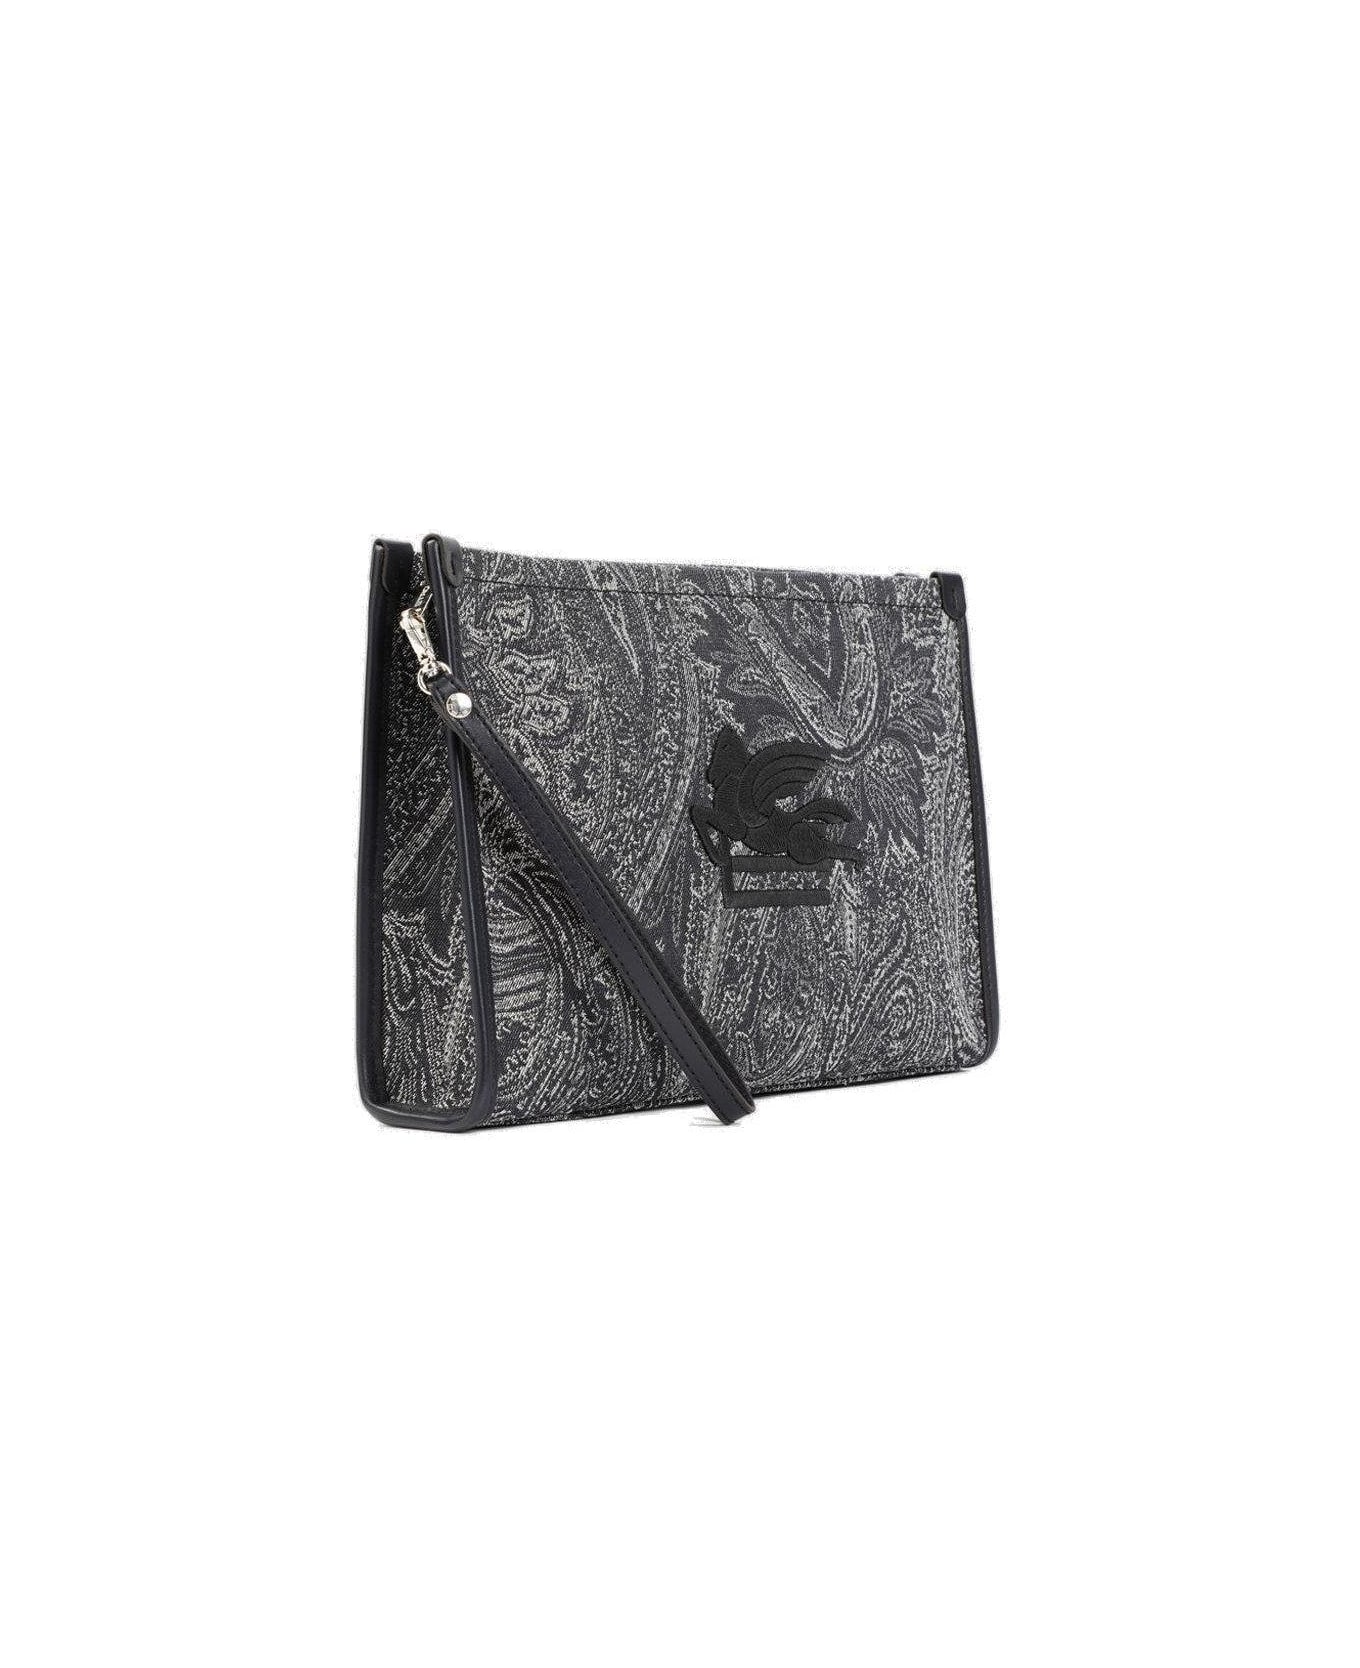 Etro Navy Blue Large Pouch With Paisley Jacquard Motif - Blue バッグ